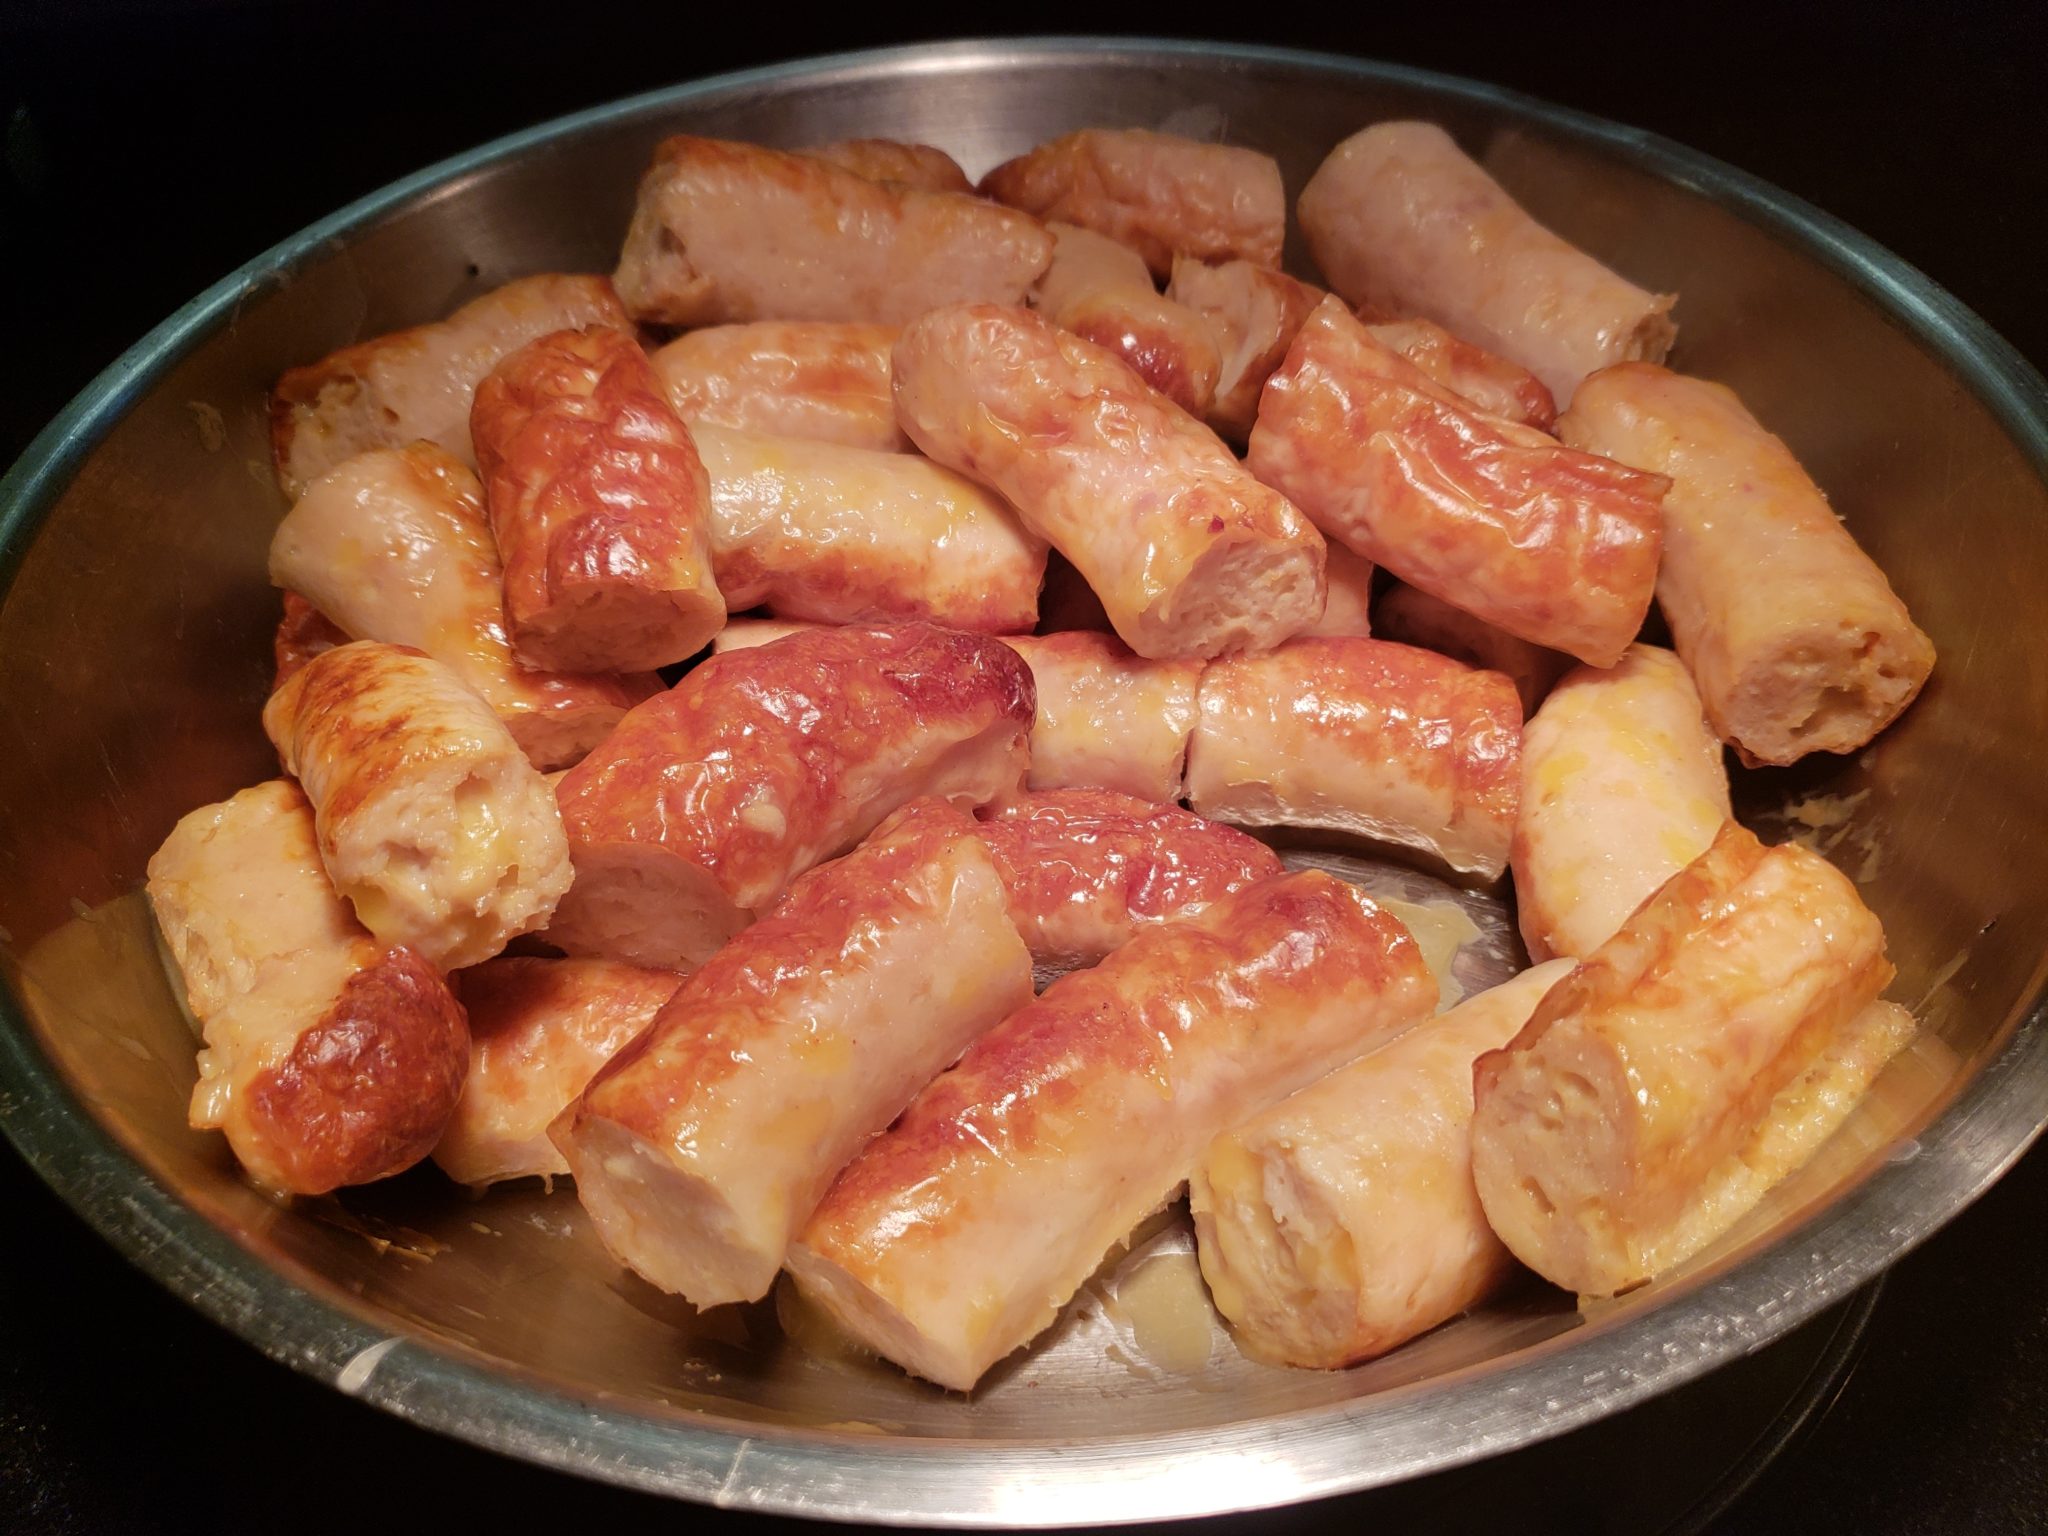 a bowl of sausages